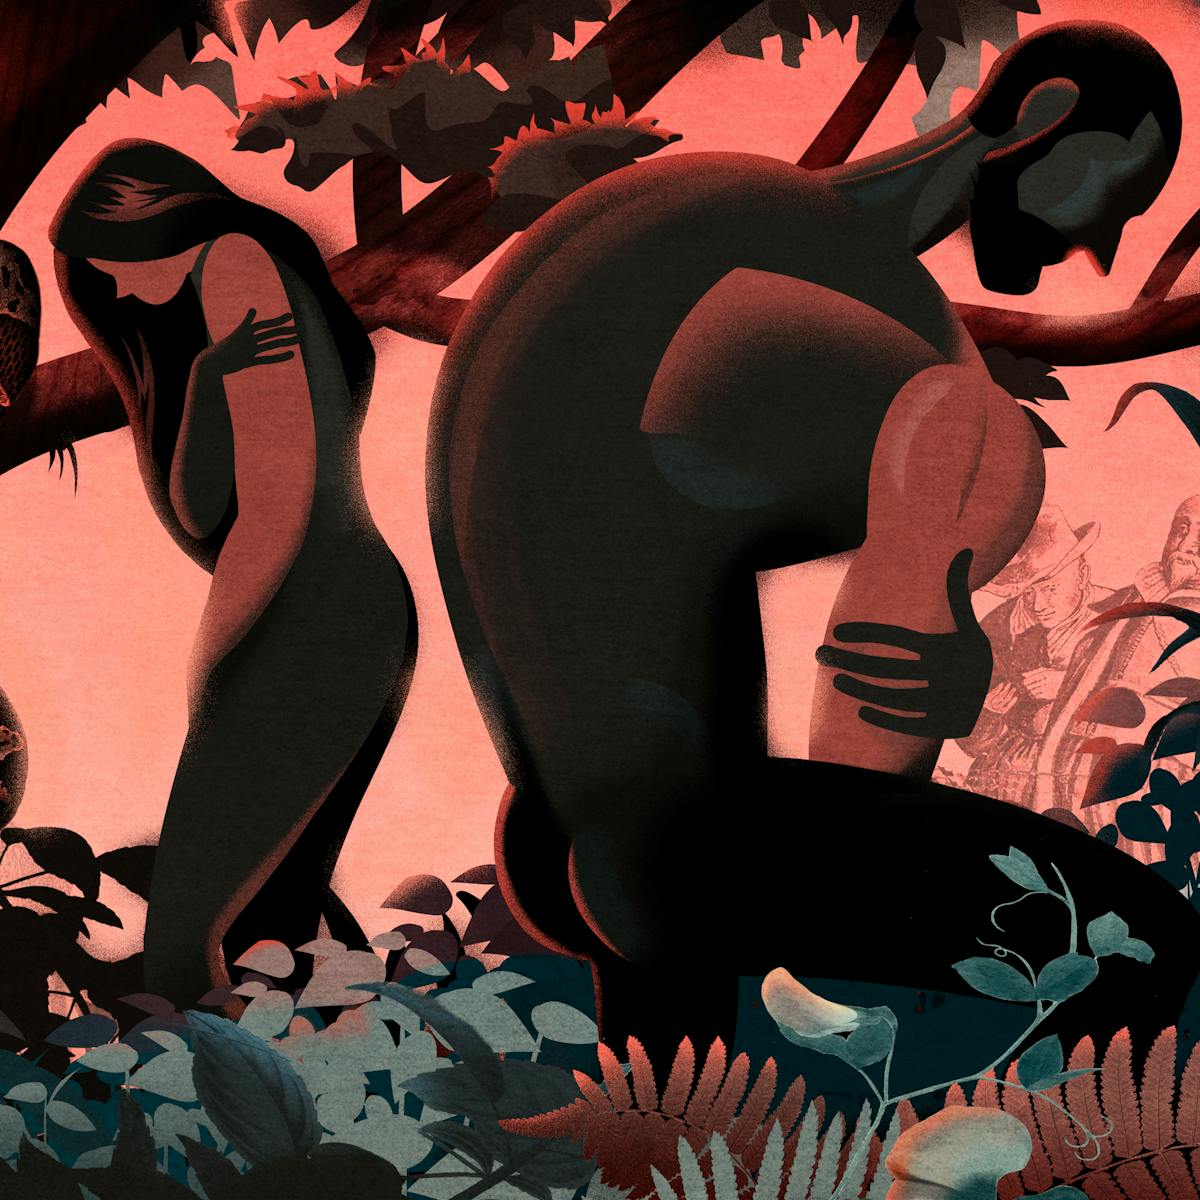 Illustration of a female figure and a male figure both hunched over, facing away from each other, arms wrapped around their bodies. They are standing in a garden setting amongst trees and shrubs. Curled around a tree is a long snake. In the background a crowd of onlookers are gazing at the couple. The hues of the illustration are muted reds and blues.